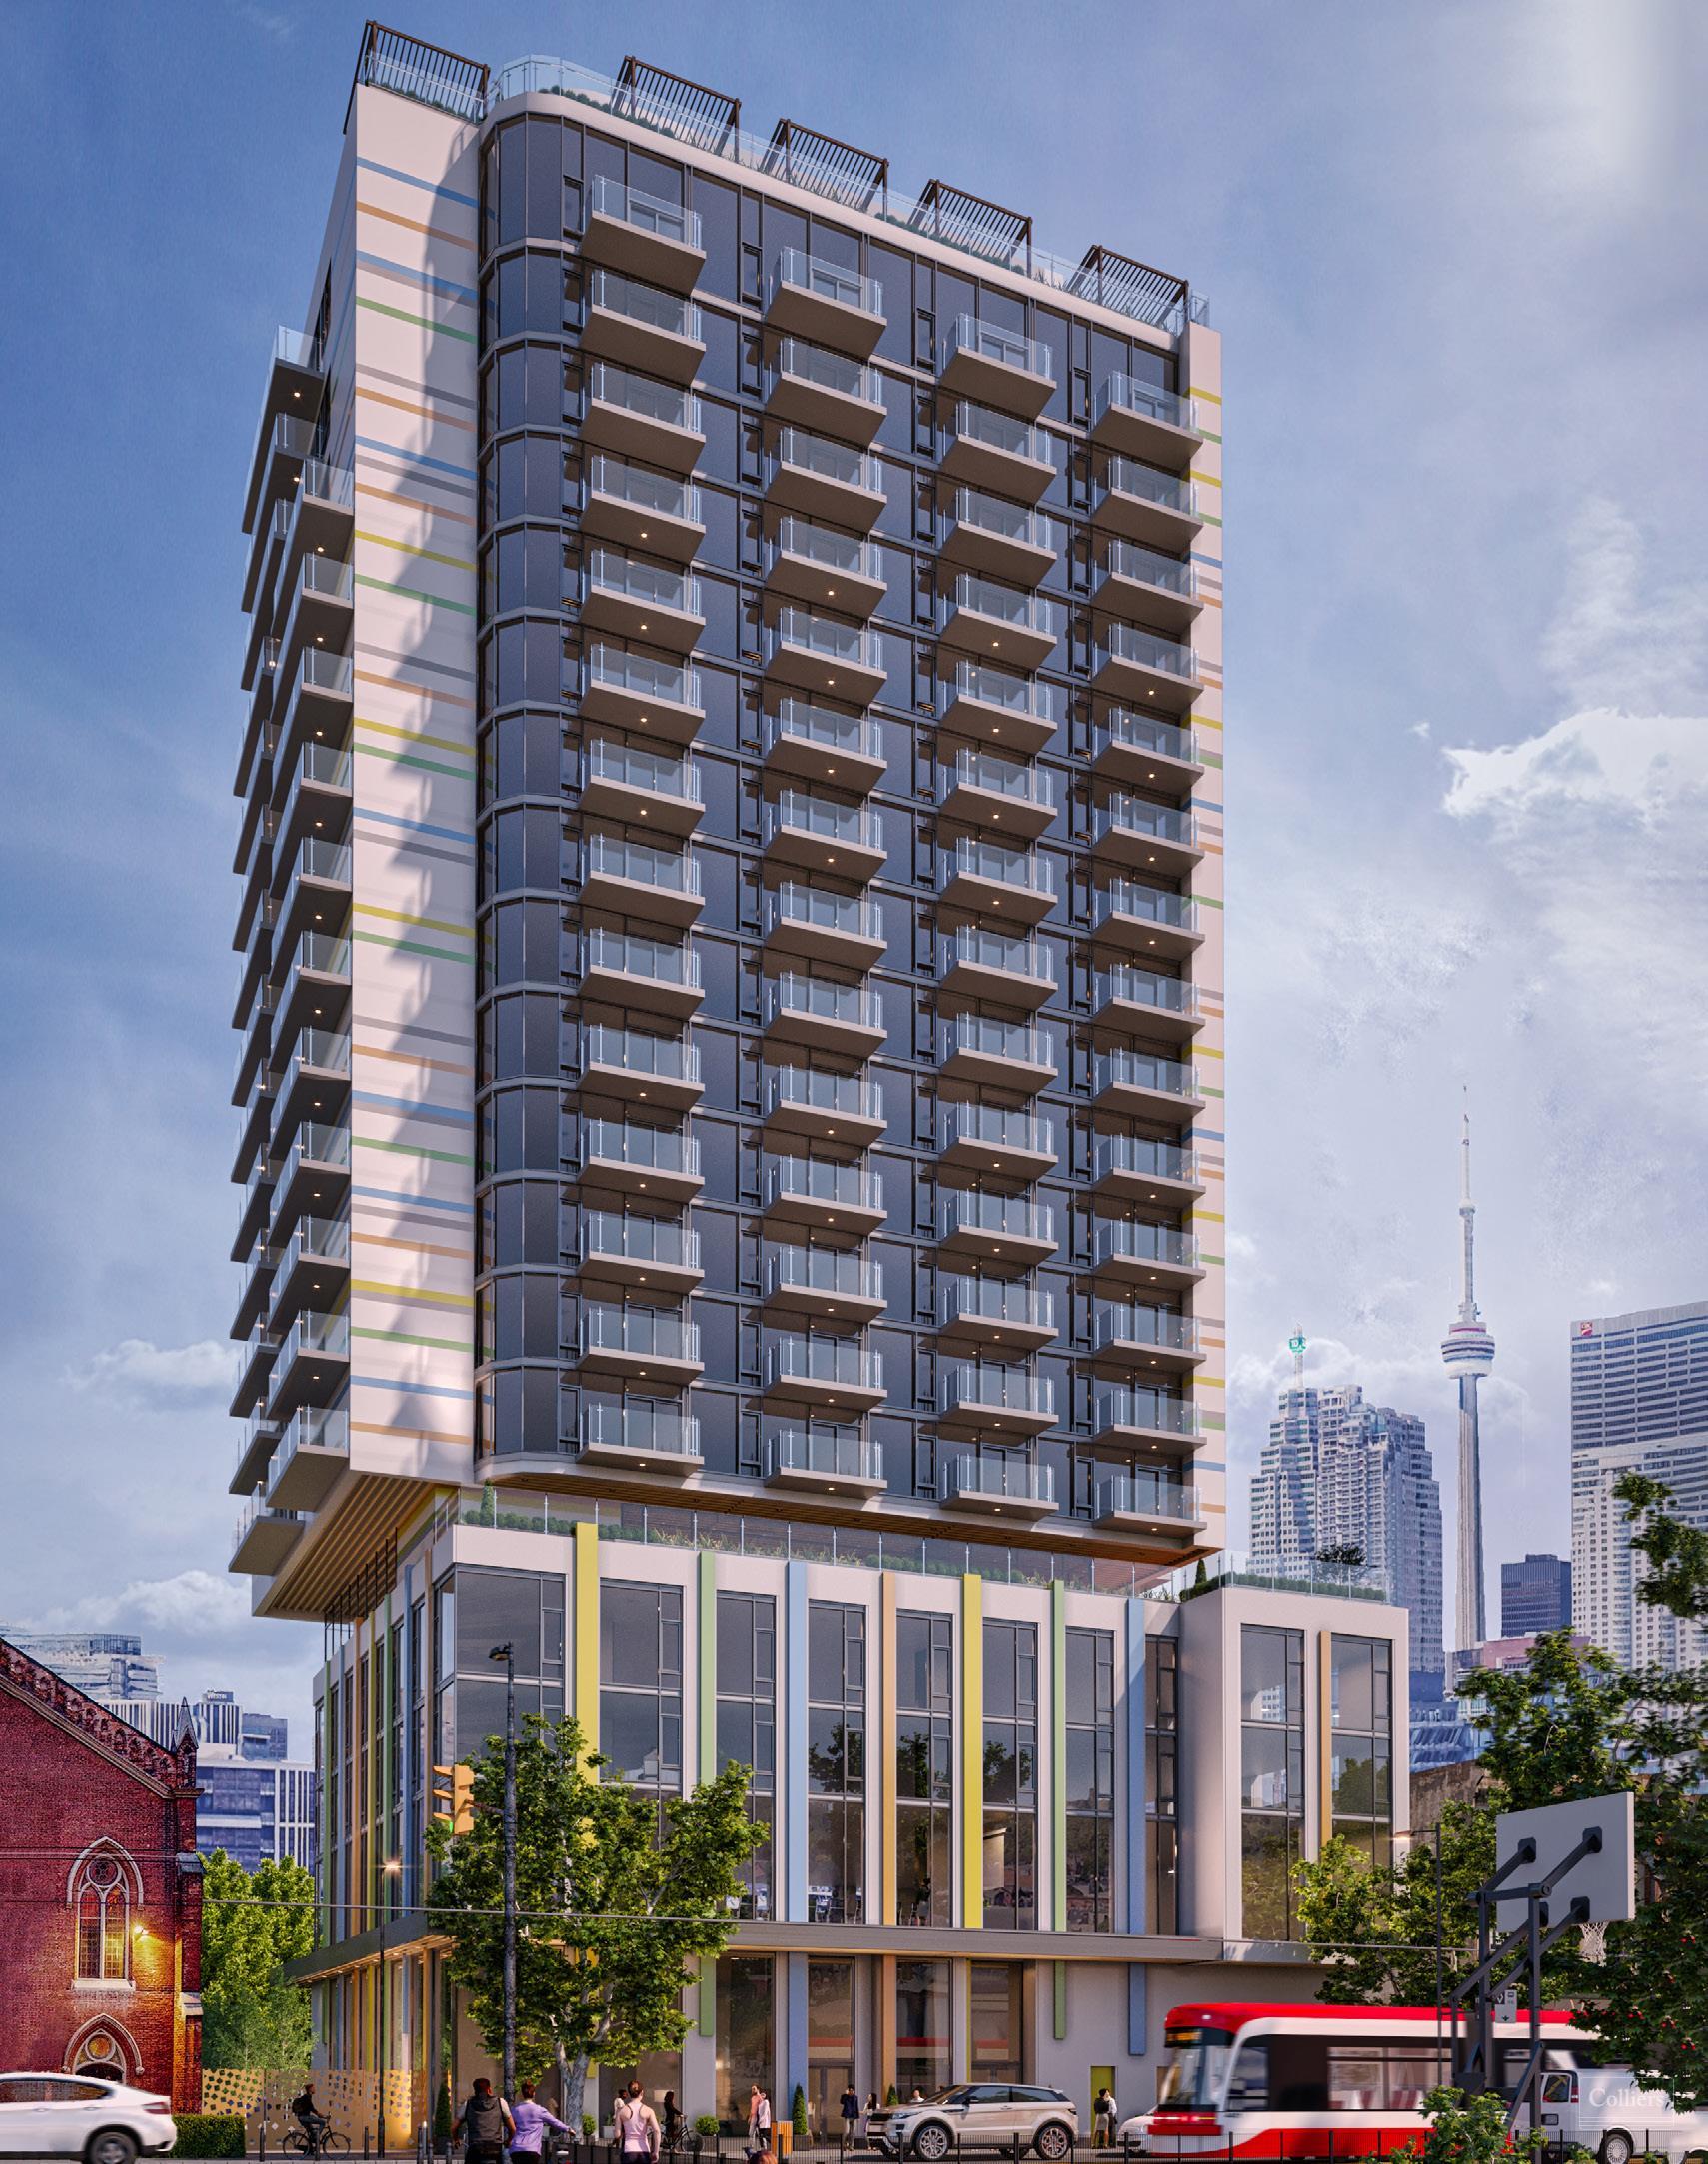 493-495 Queen Street West, Toronto - The Pearl Group